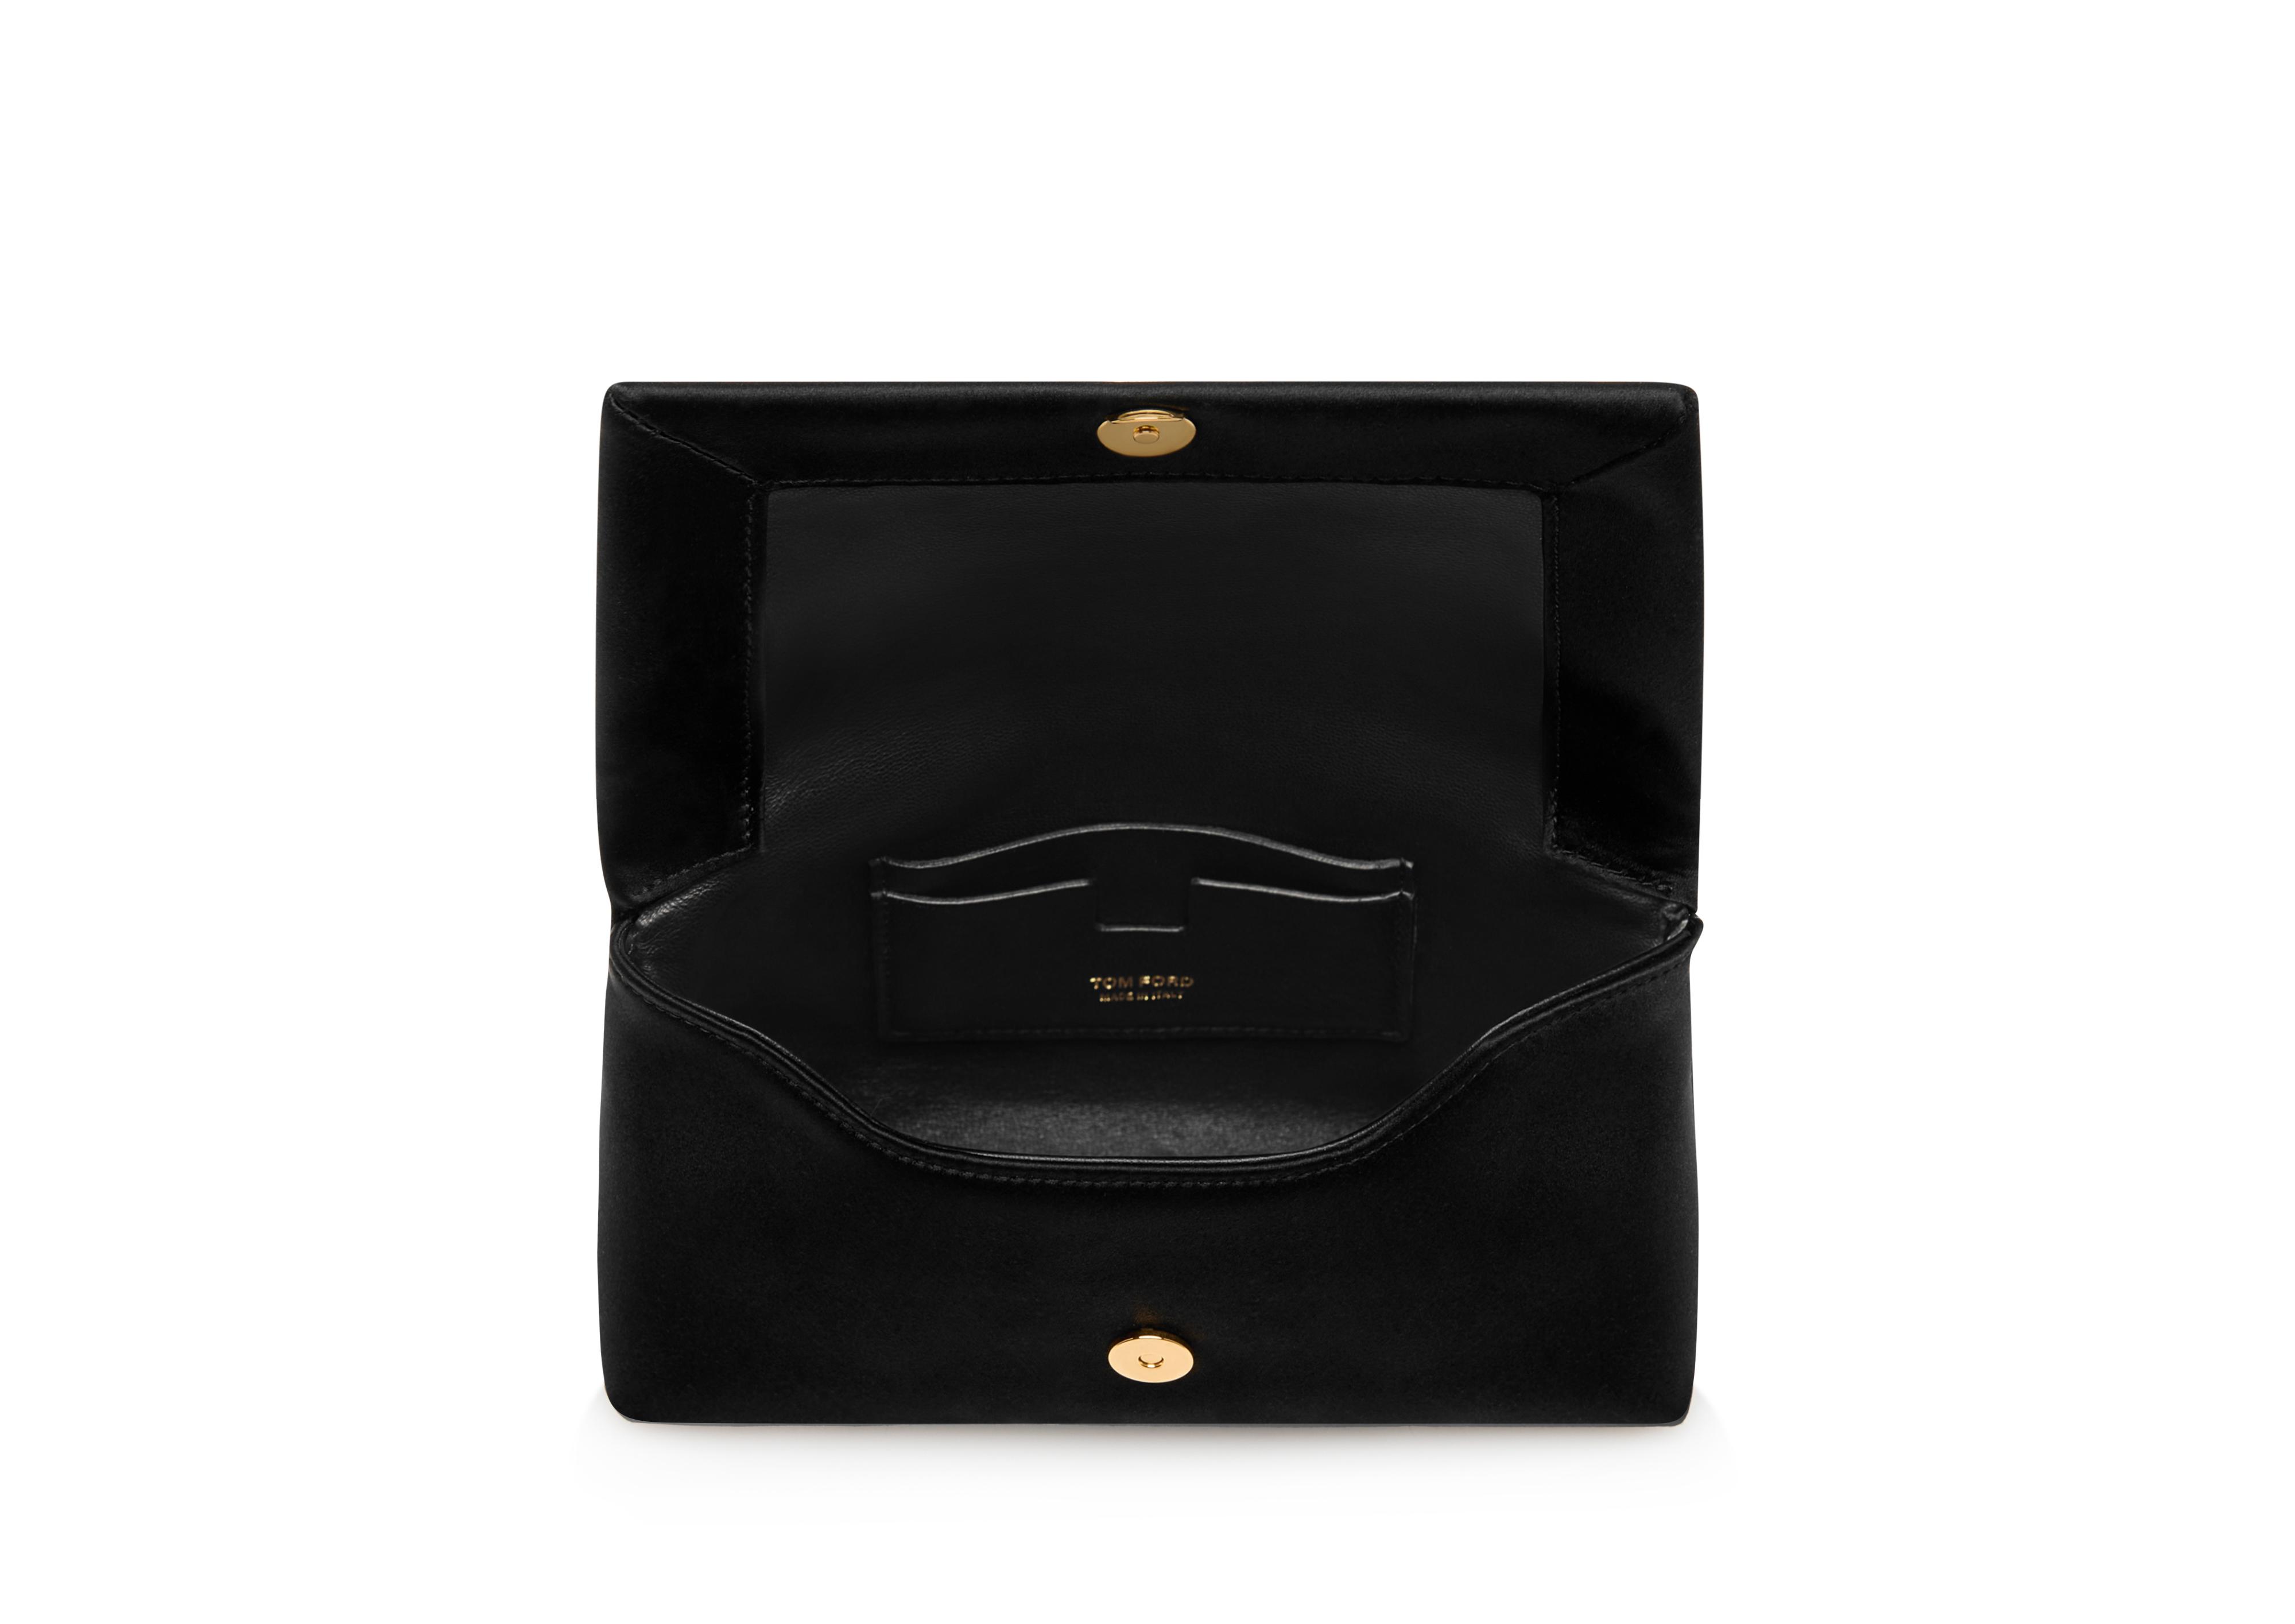 TOM FORD Small Satin Chain Clutch Bag